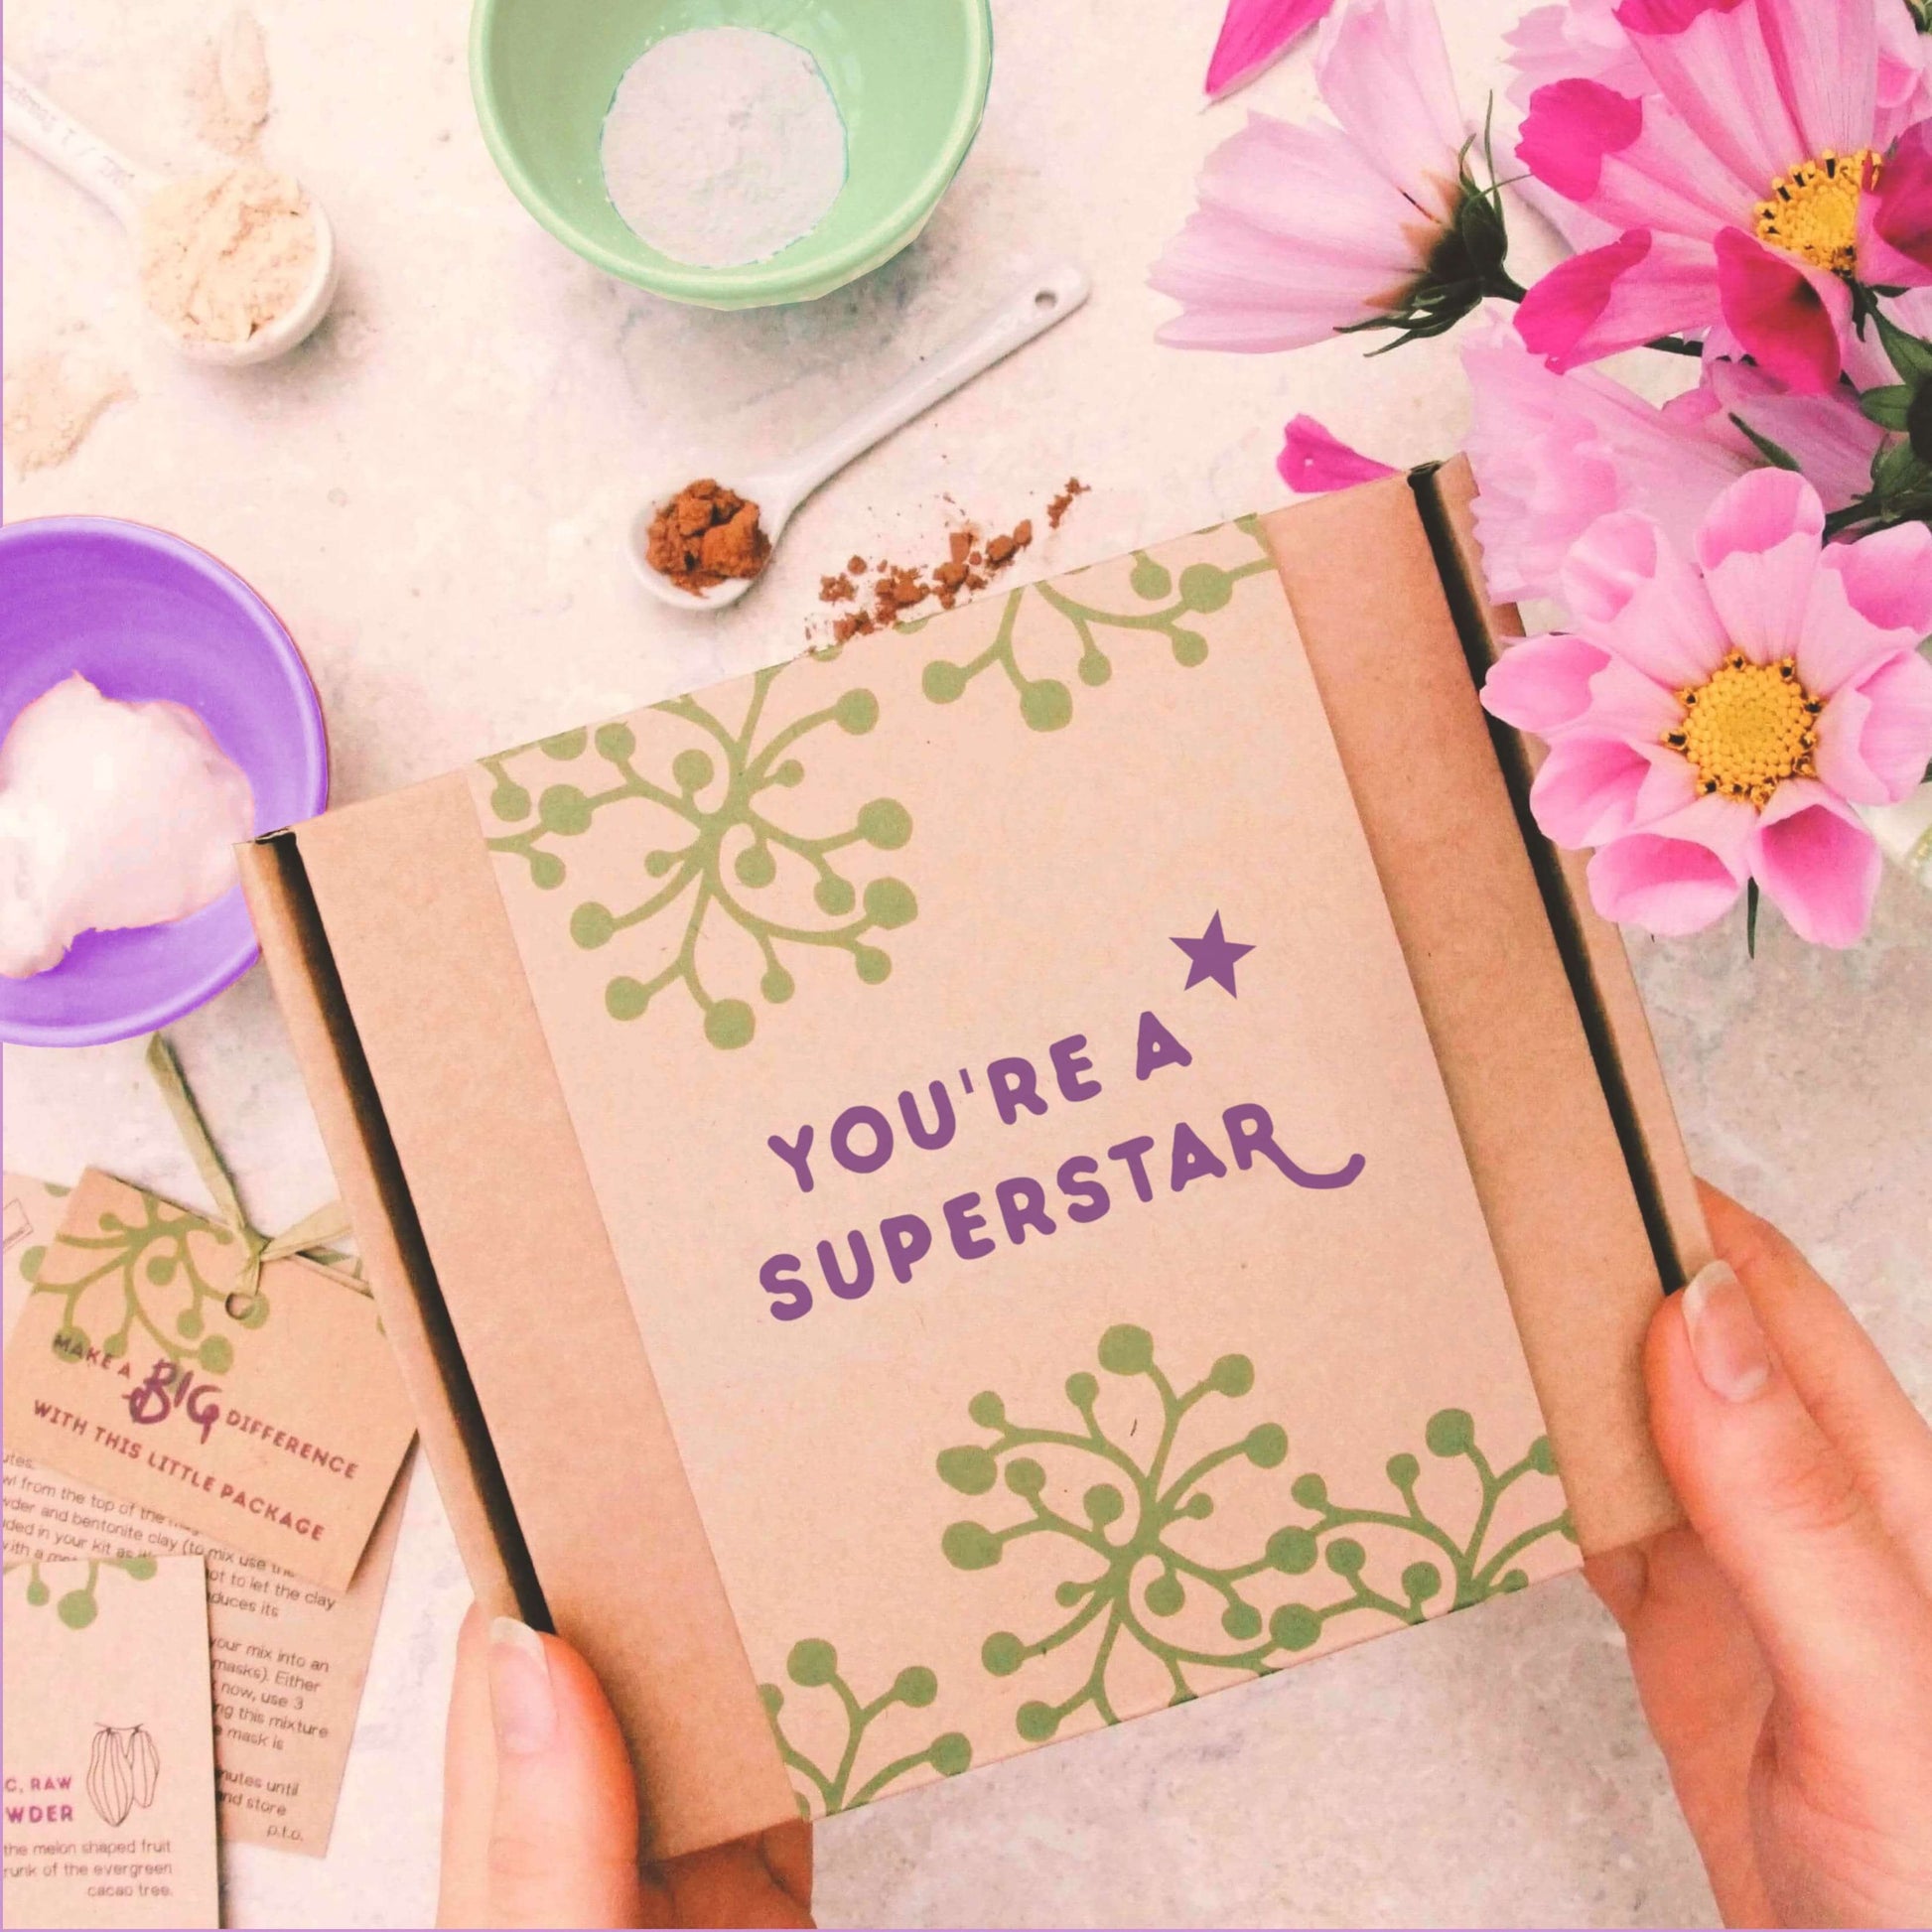 pick me up letterbox gift with gift message 'you're a superstar'